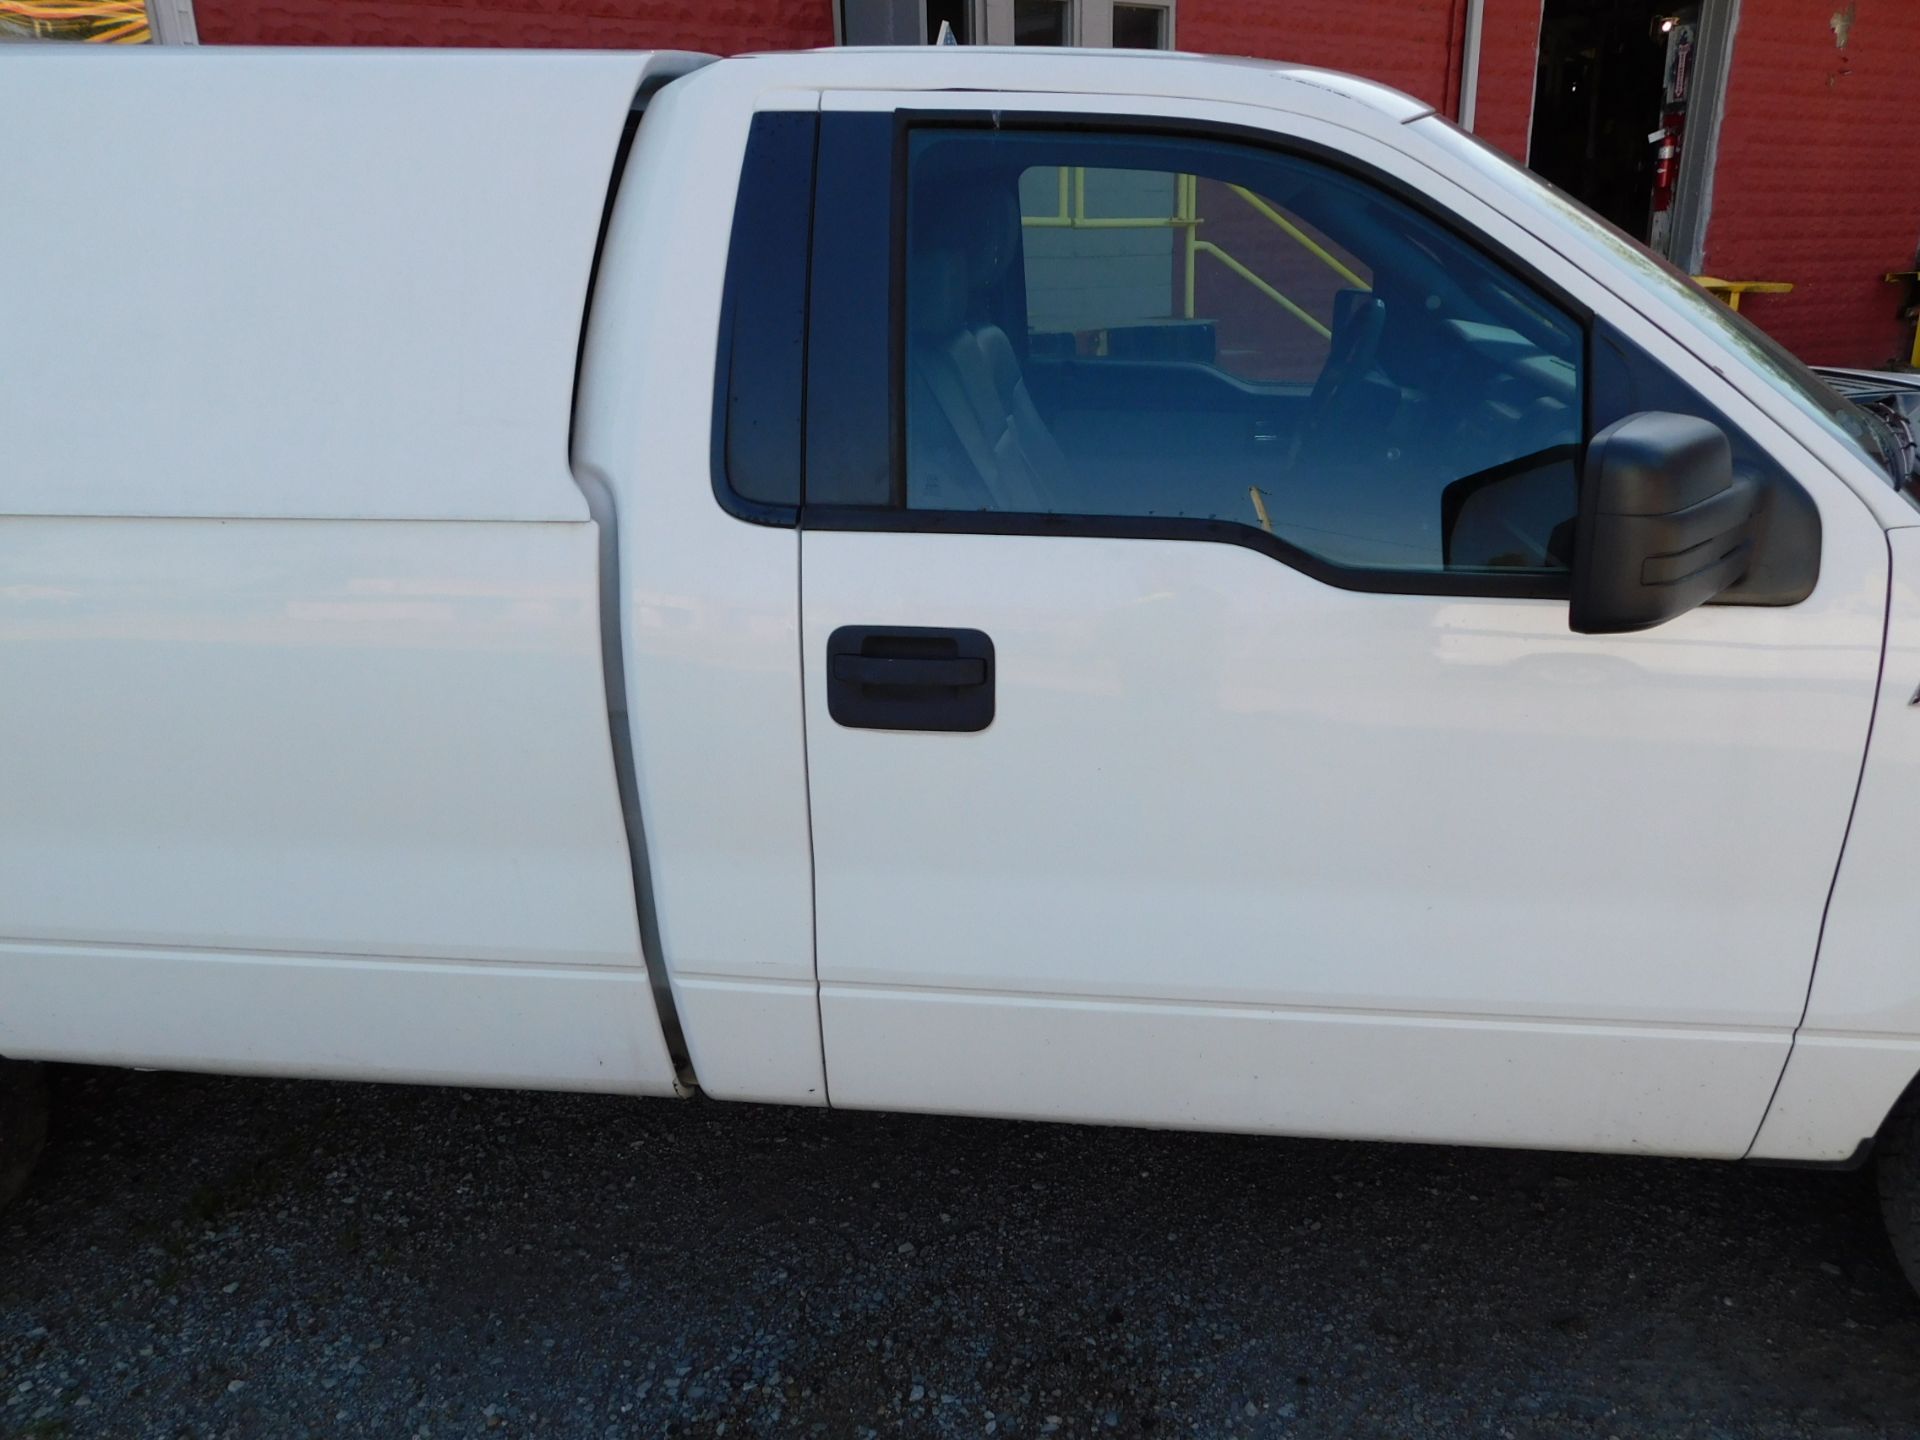 2011 Ford Pick up F-150XL vin 1FTMF1CM3CKD12942, Automatic Transmission, PW, Pl, 8'Bed w/Cap 146,289 - Image 25 of 46